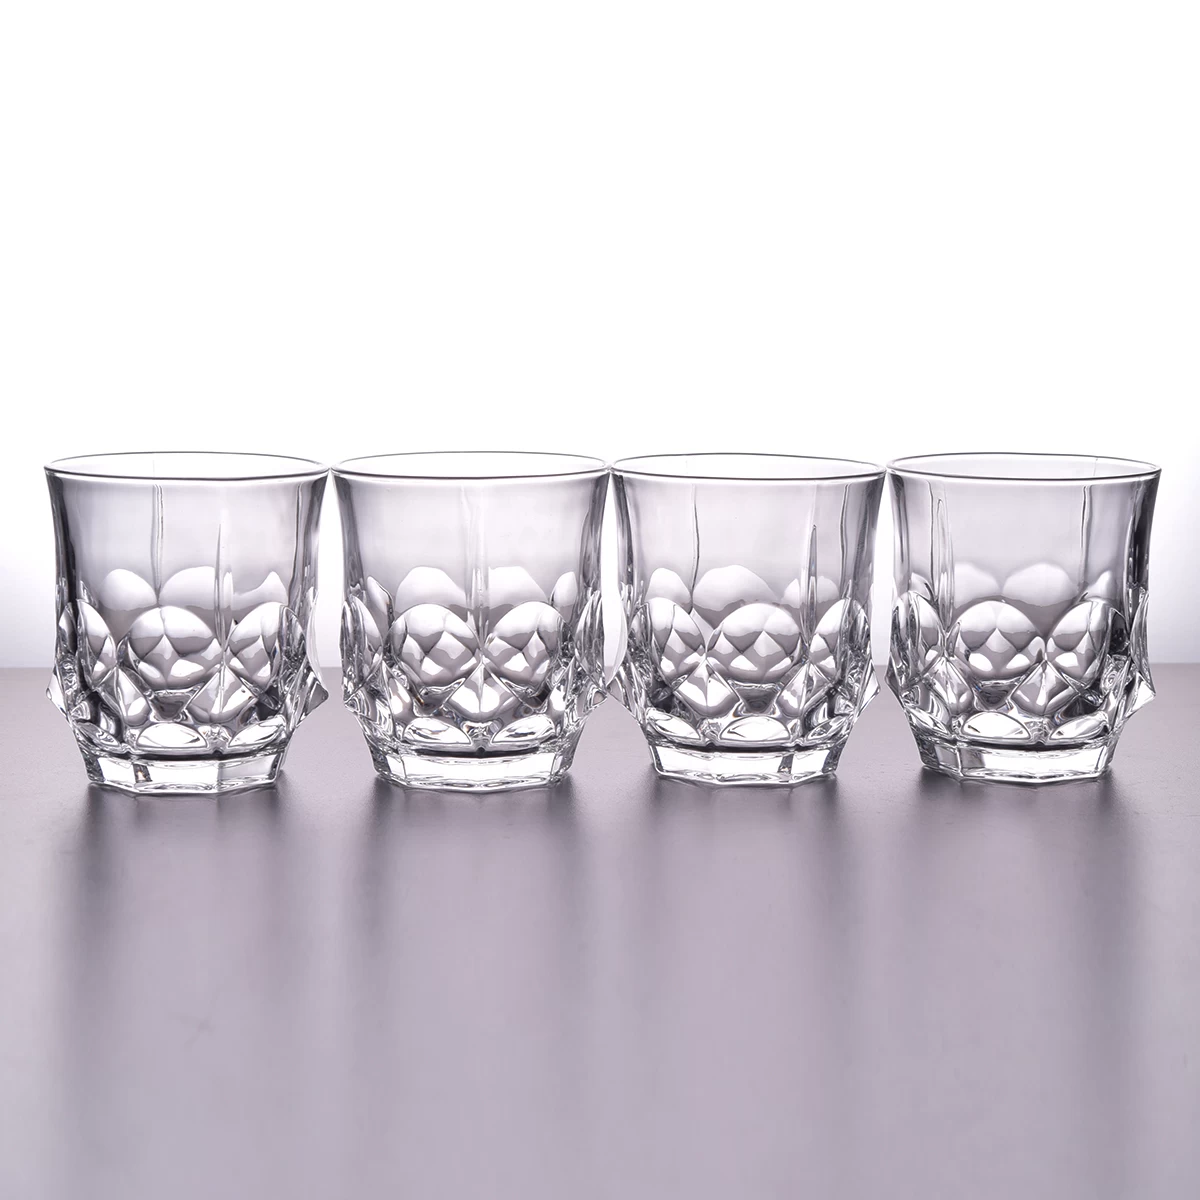 Hot Popular Crystal glass whiskey decanter sets